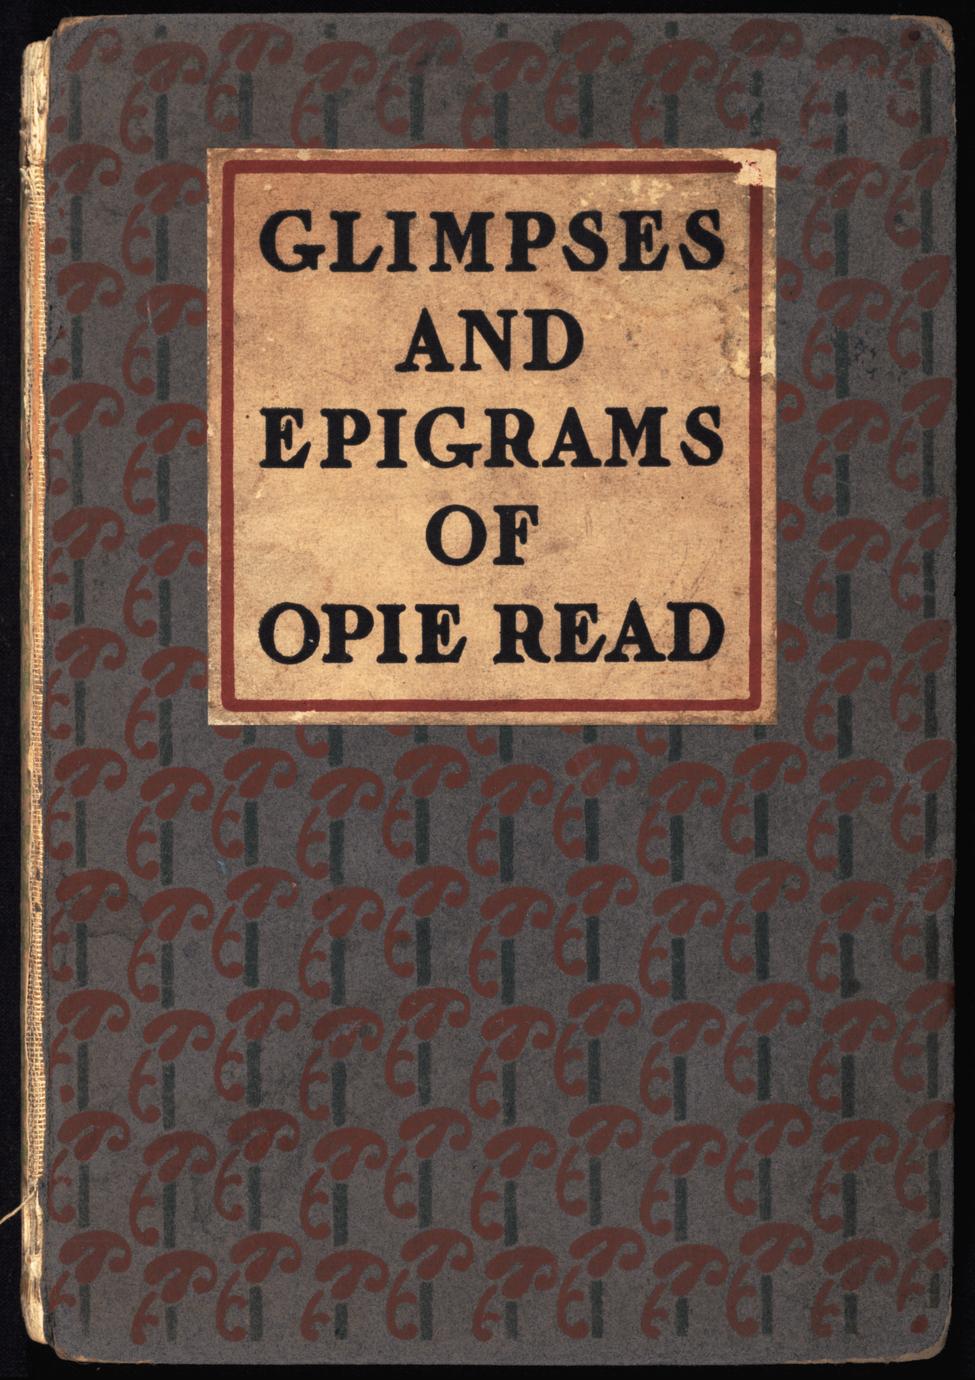 Glimpses and epigrams (1 of 2)